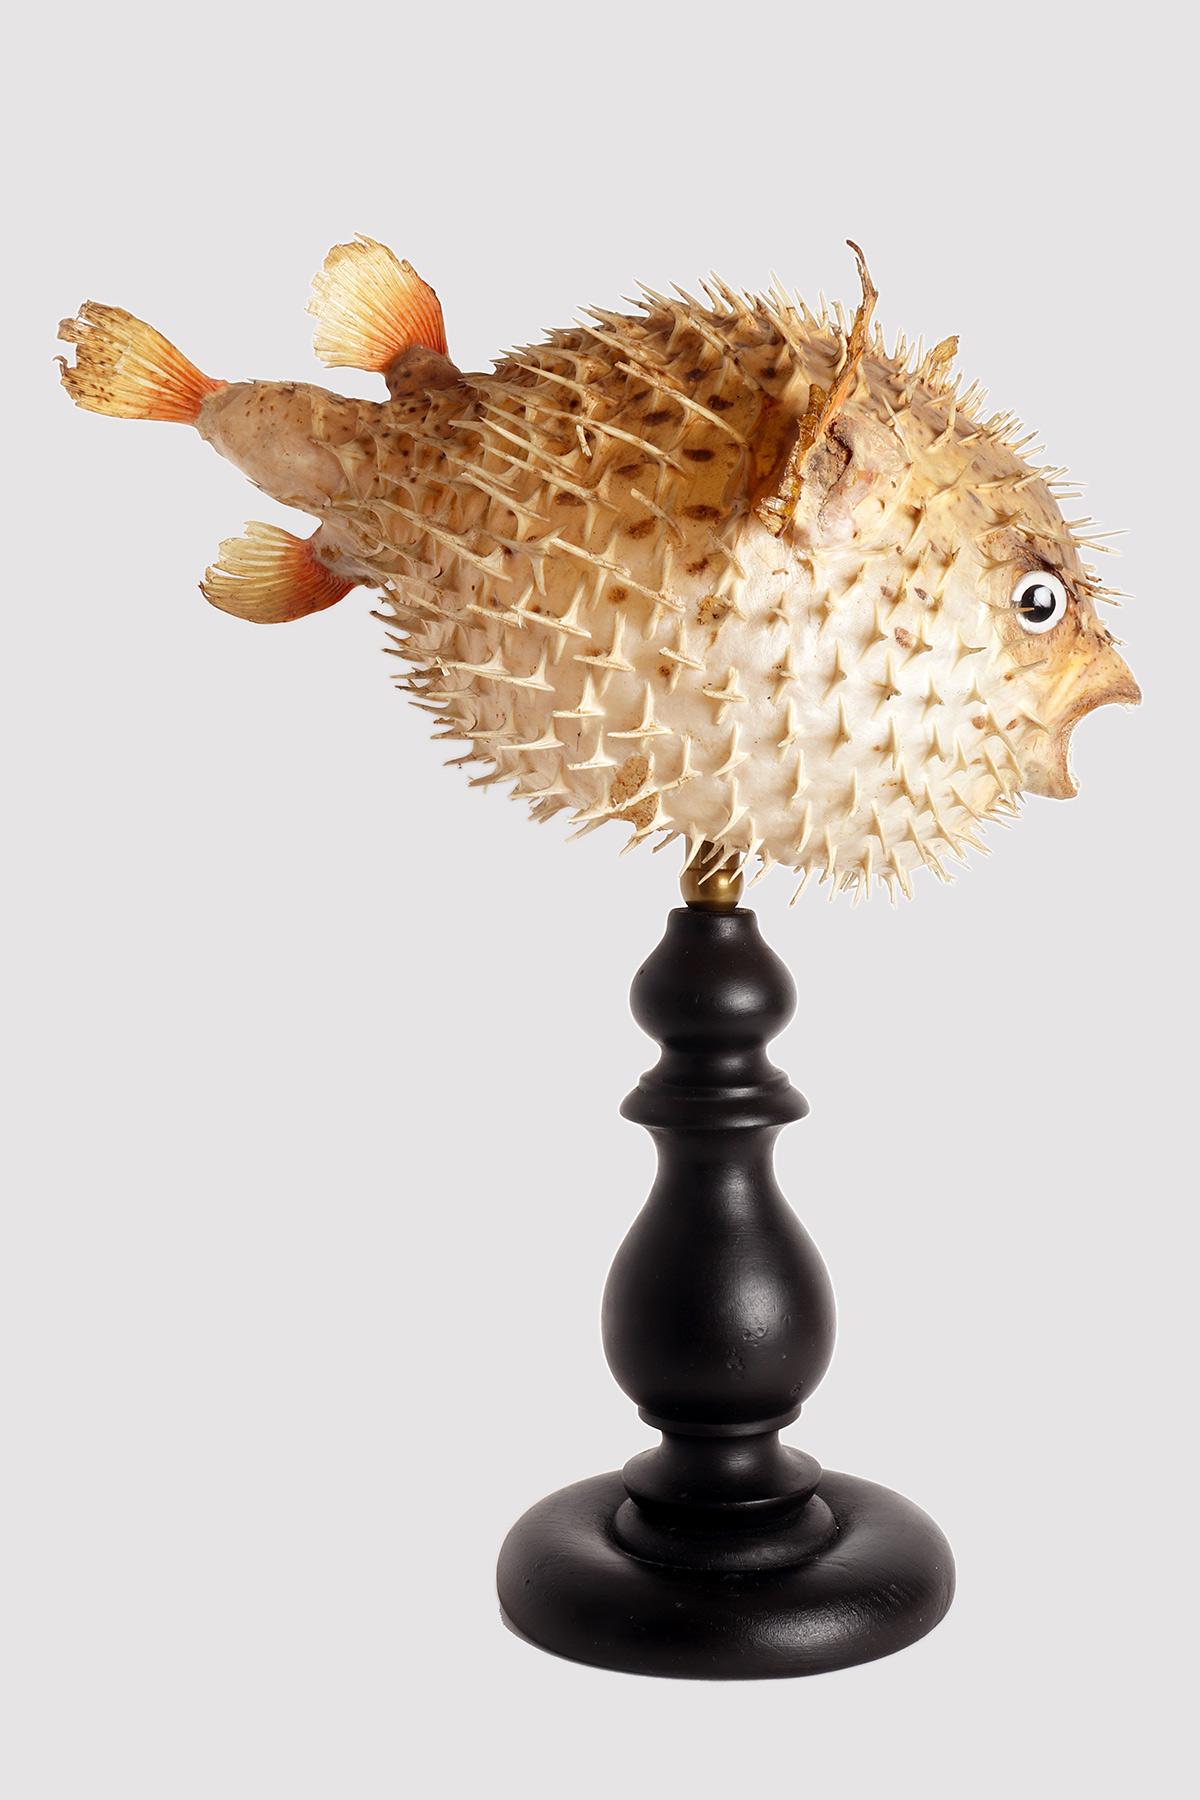 Taxidermy marine natural Wunderkammer specimen, the common porcupine fish (Tetrodon Cutcutia). The Specimen is stuffed and mounted over a round fruitwooden base black color. Sulphur glass eyes. Italy circa 1880.